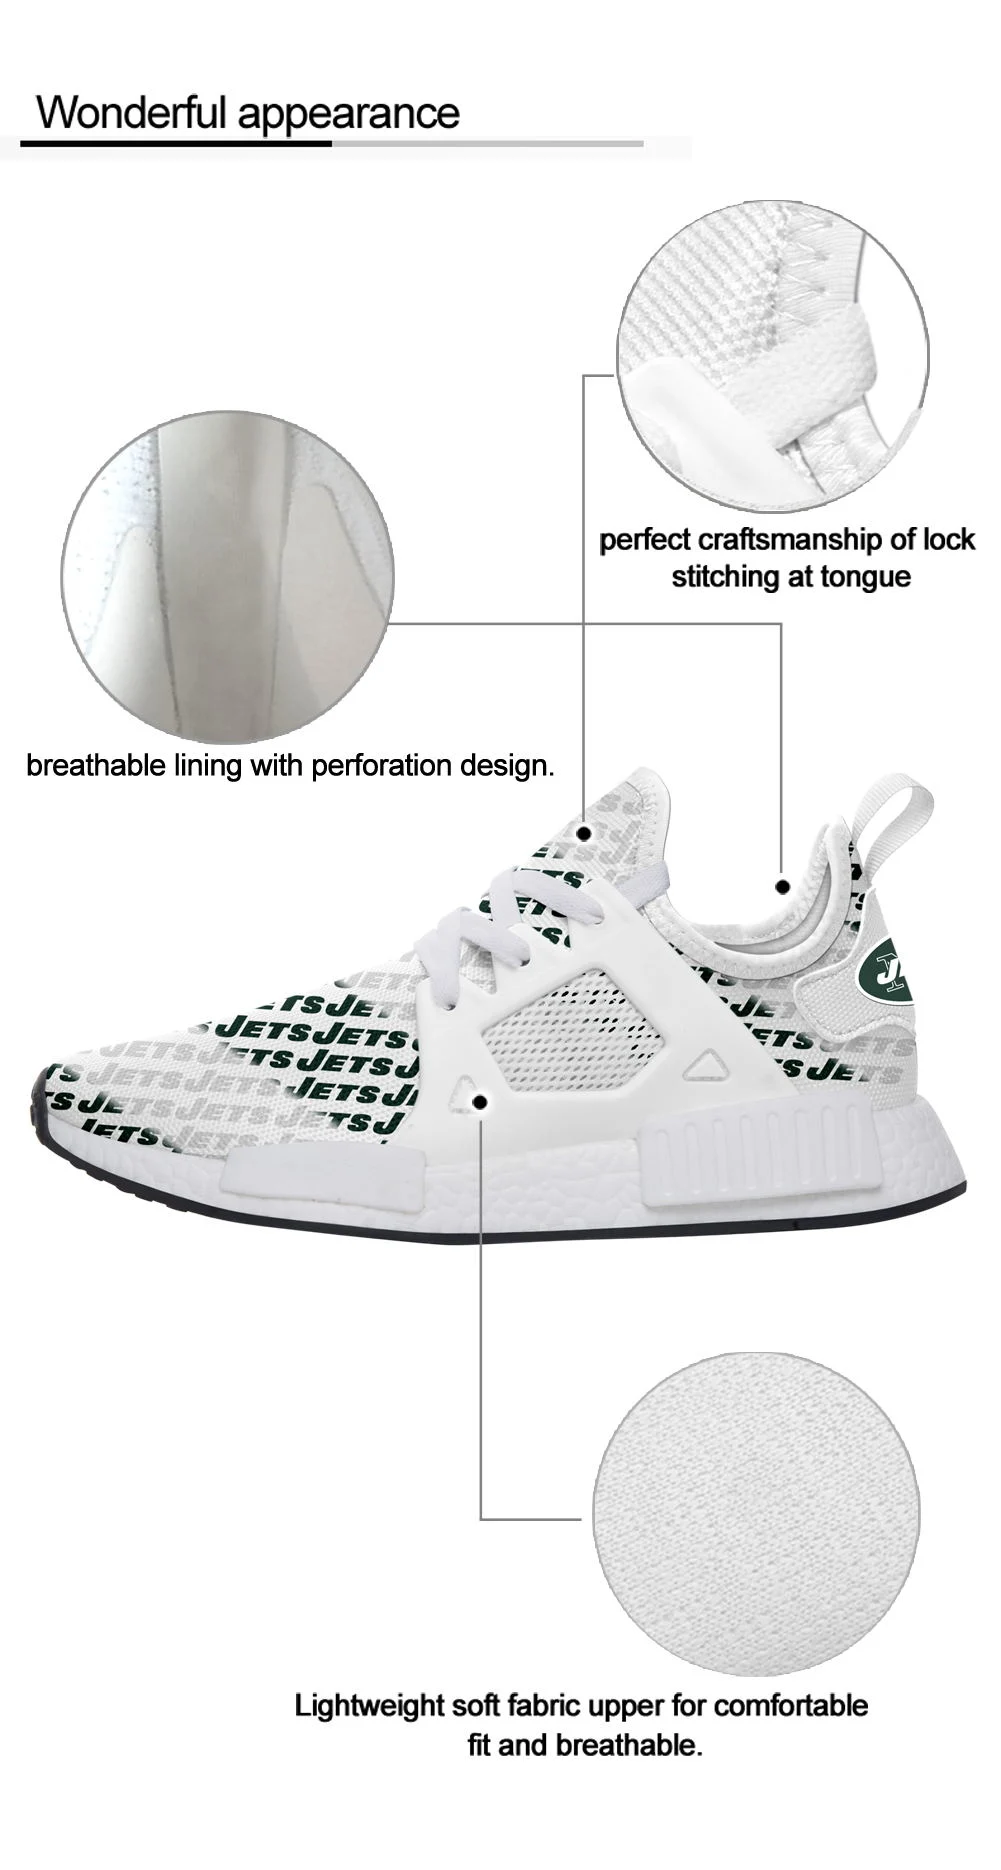 Custom Shoes for NFL Team Jets Nmd Design Your Own Fashion Sneakers